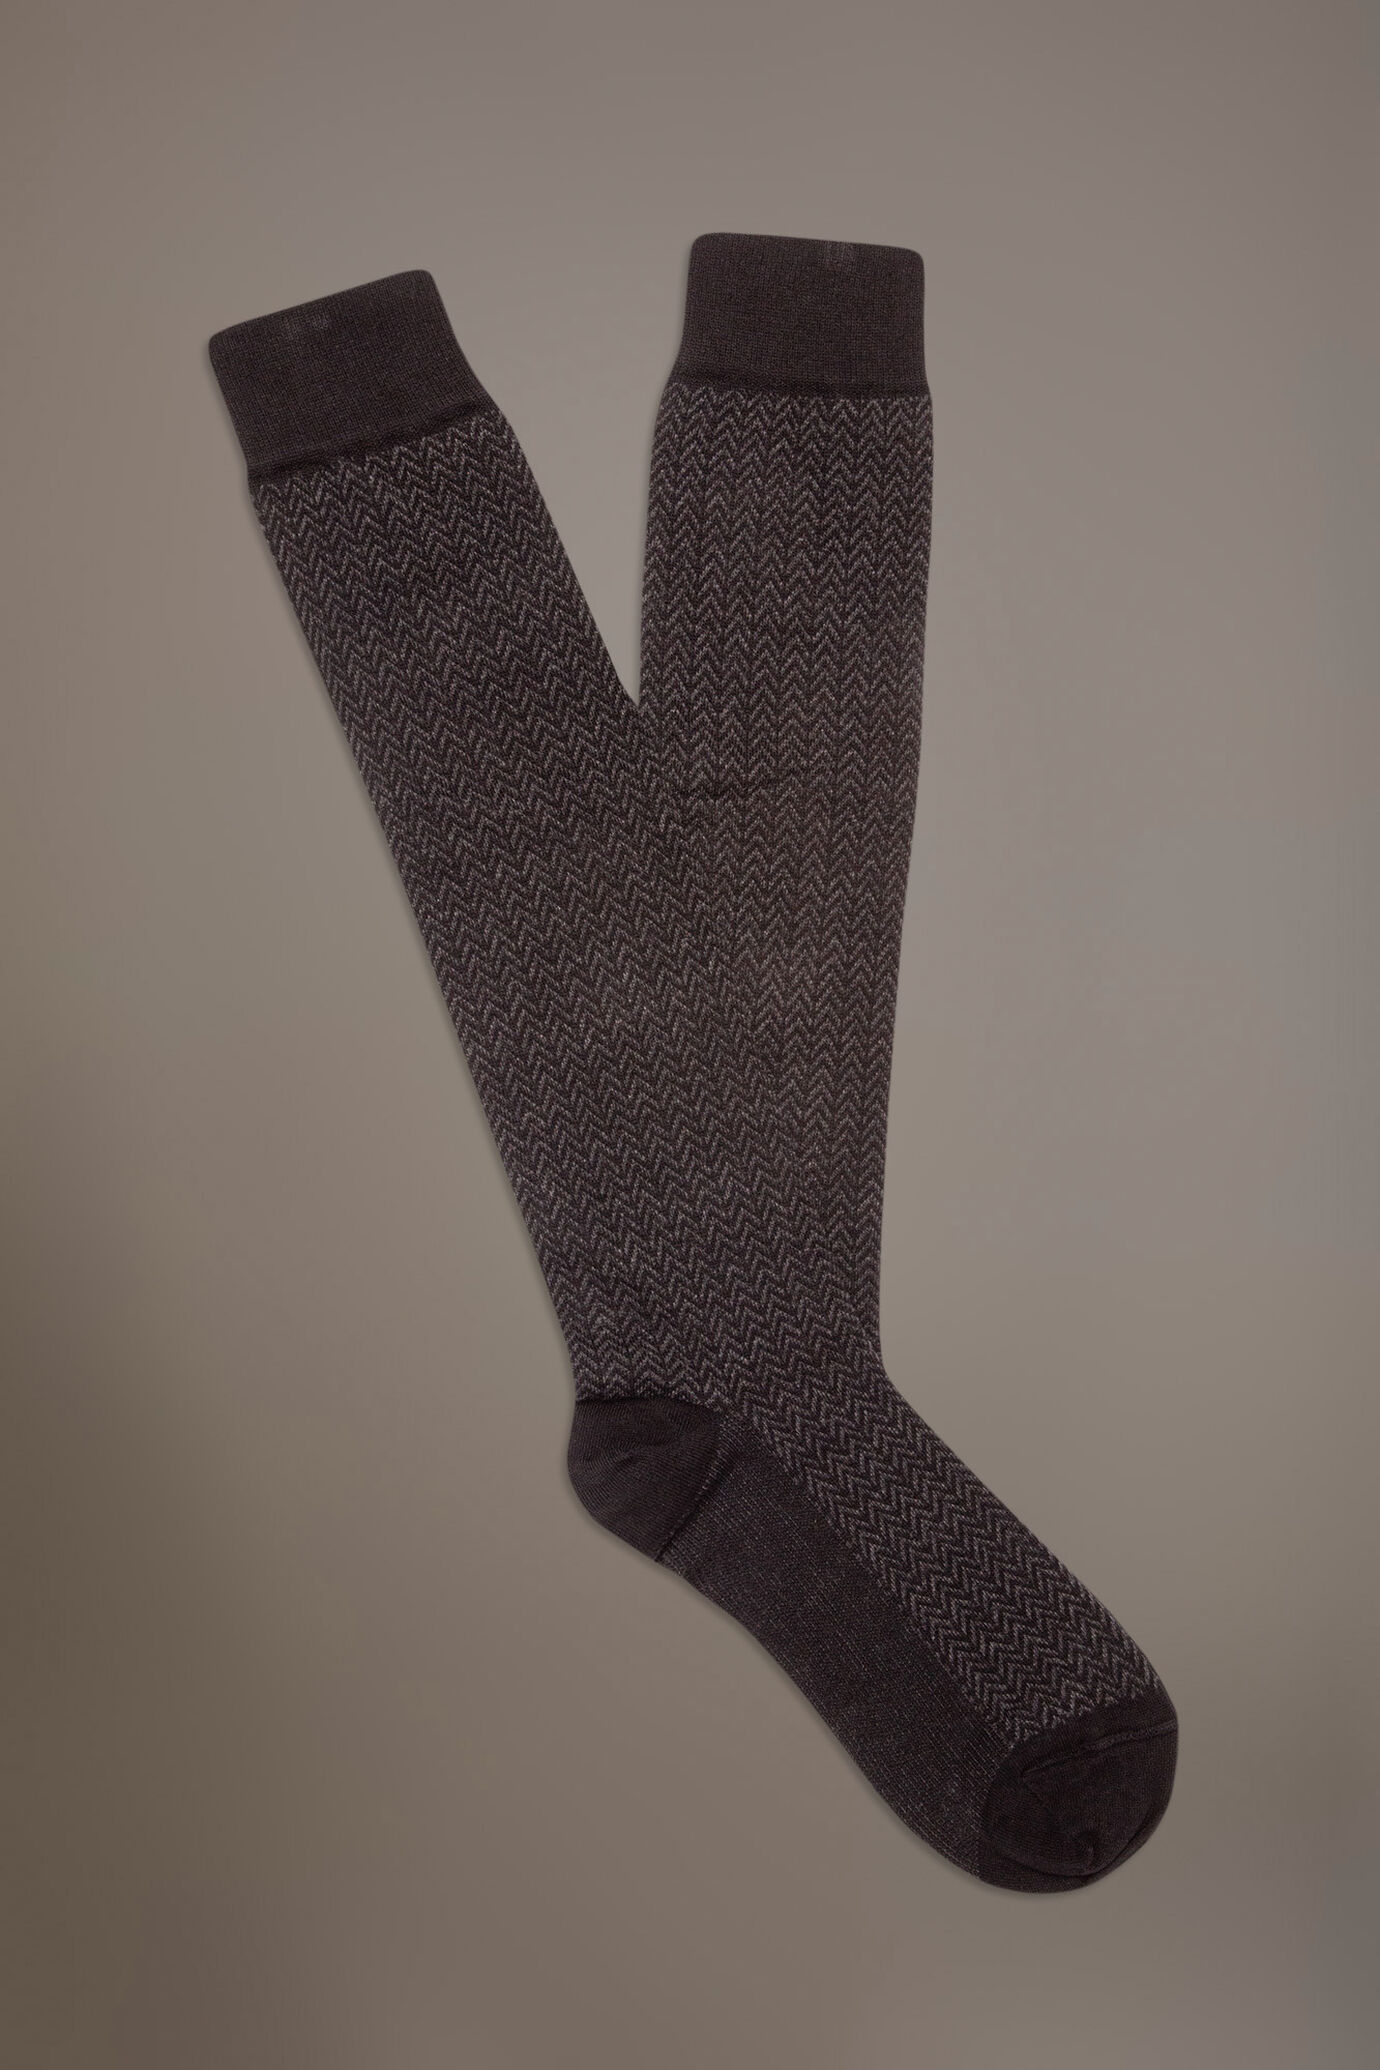 Long socks in stockinette stitch made in Italy image number 0